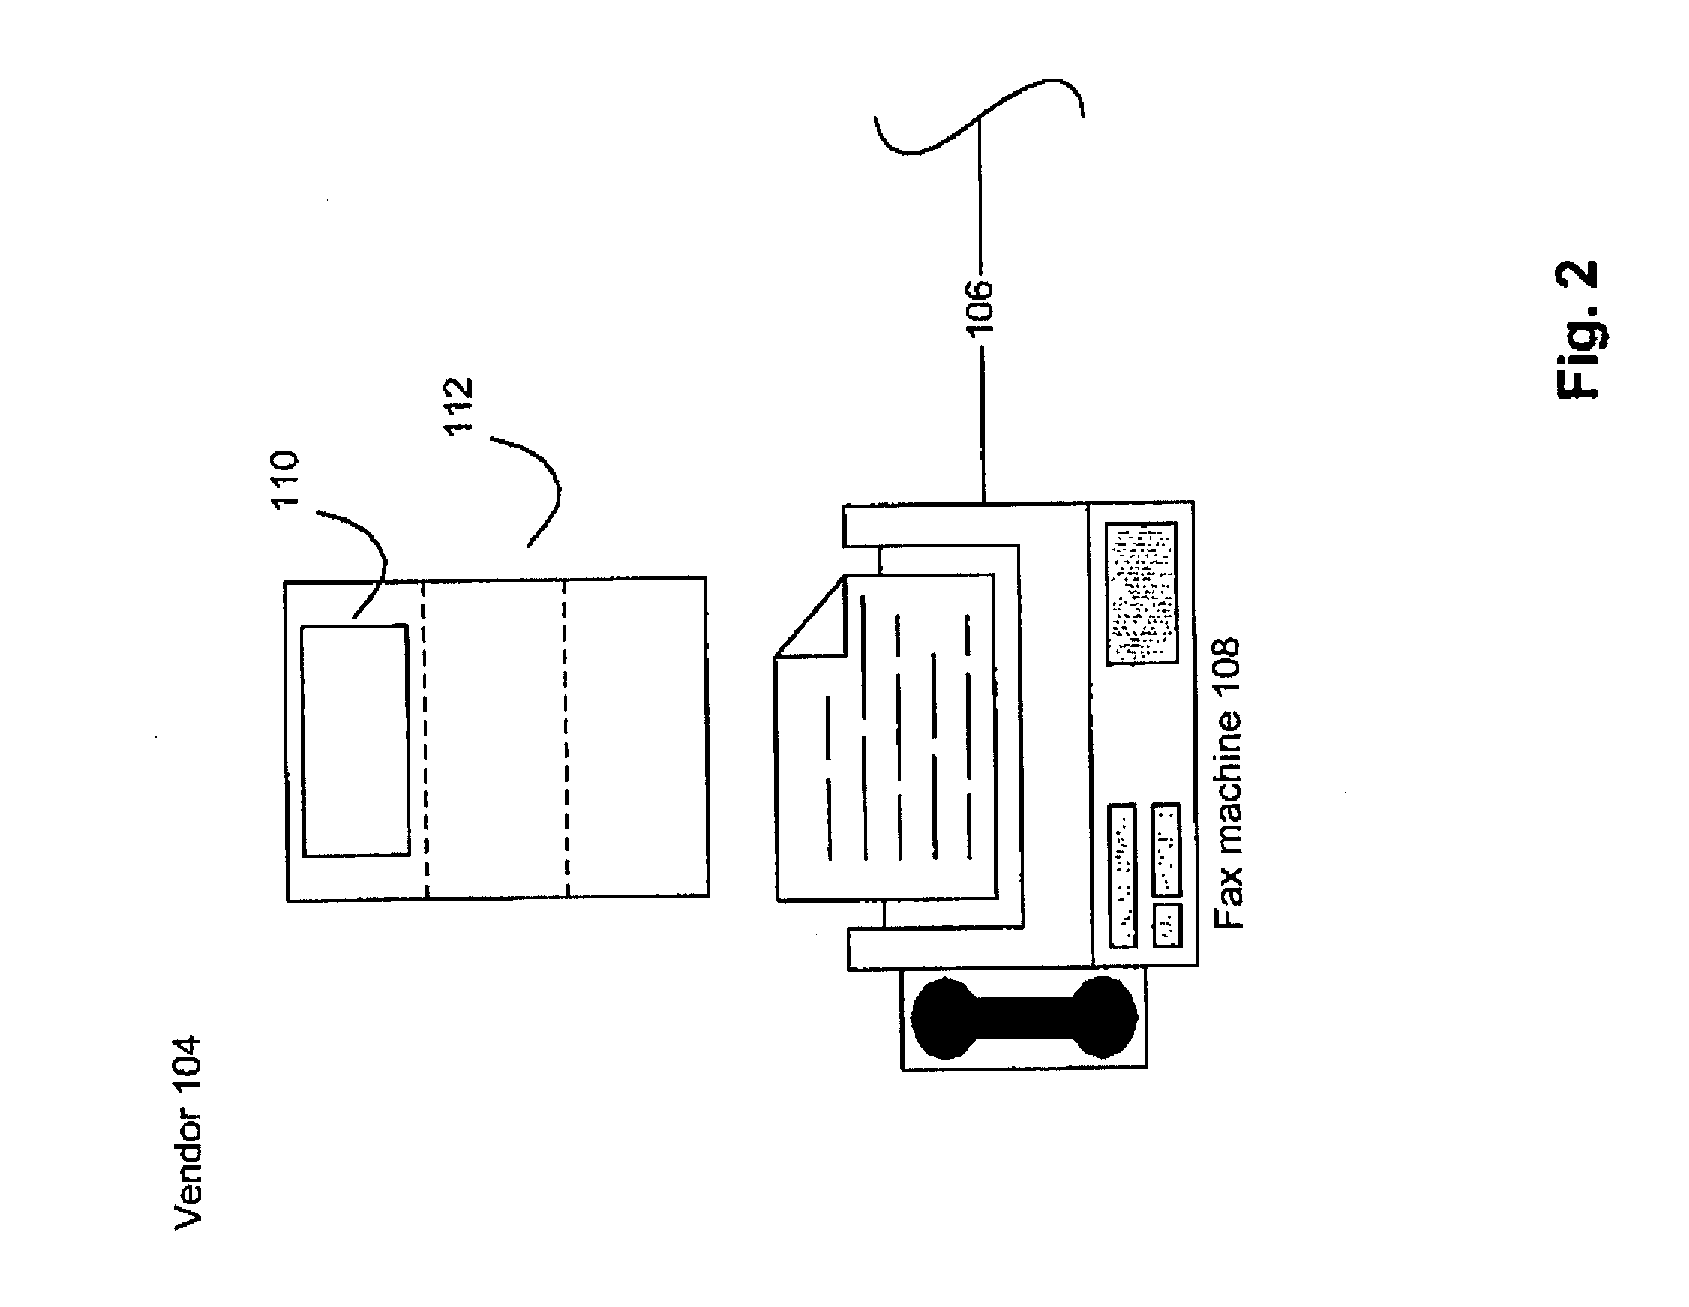 System and Method for Remote Deposit System